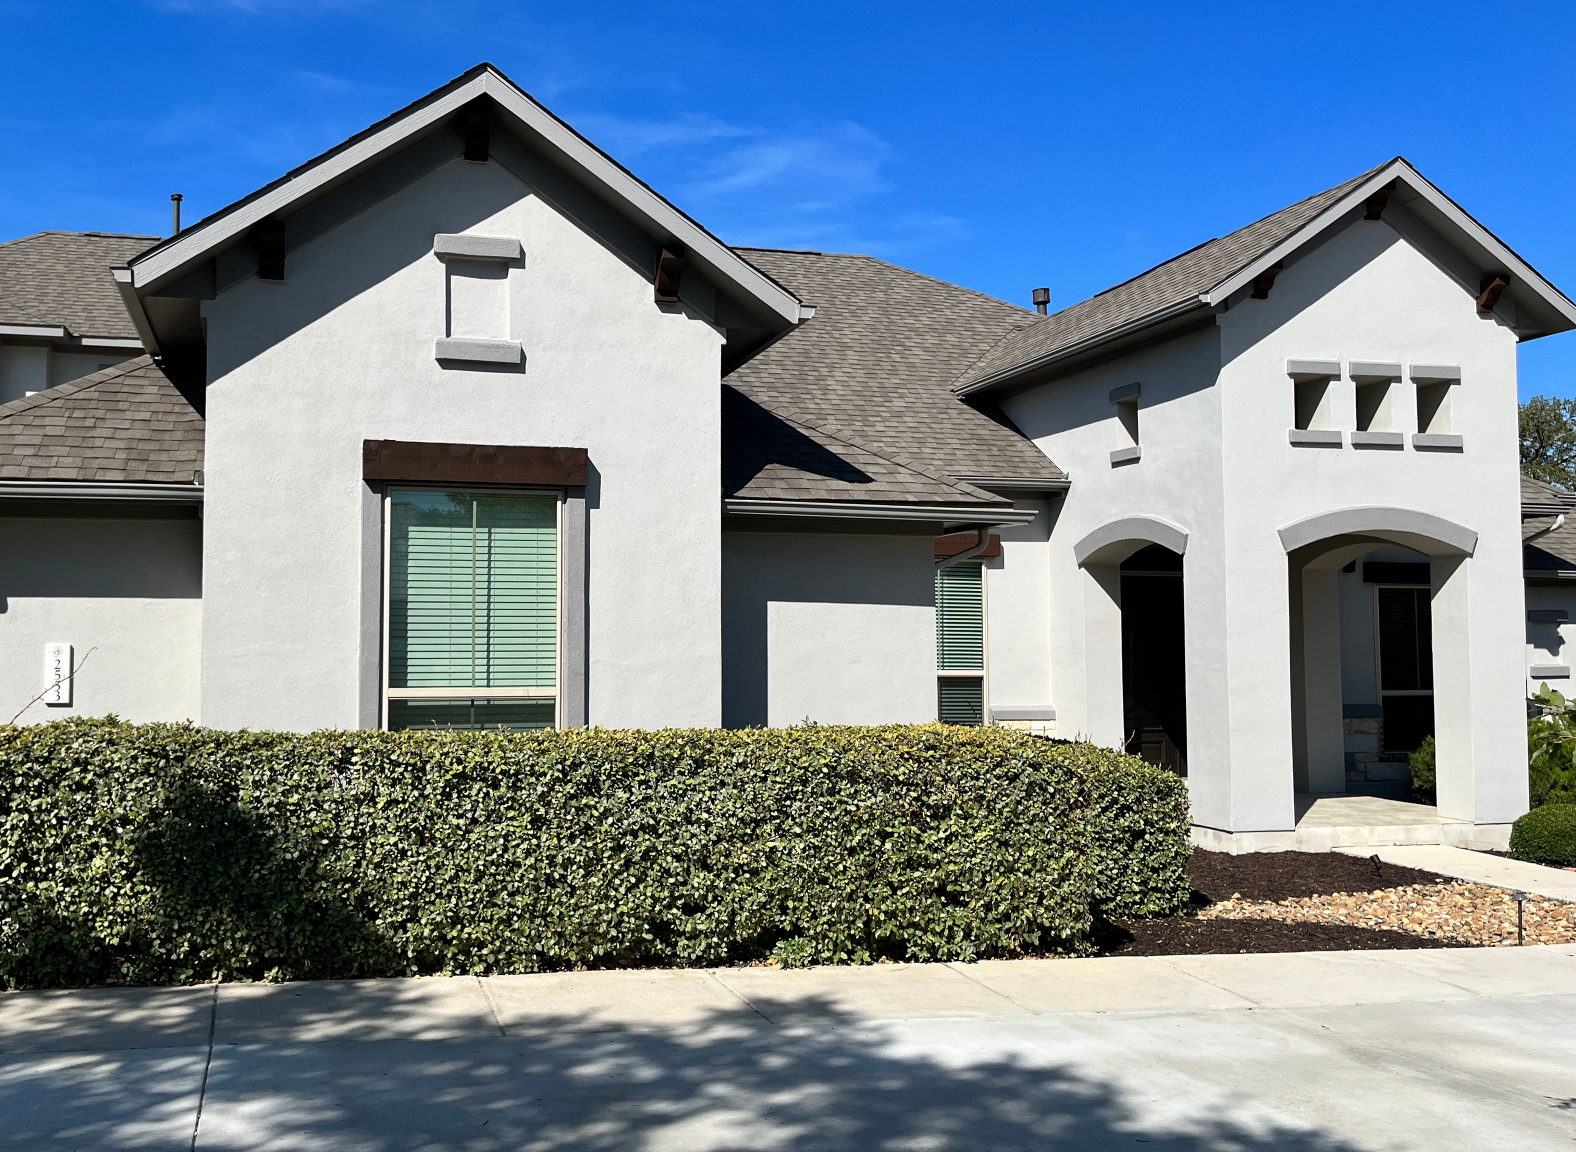 Stucco House Painting & Repair in New Braunfels, TX After